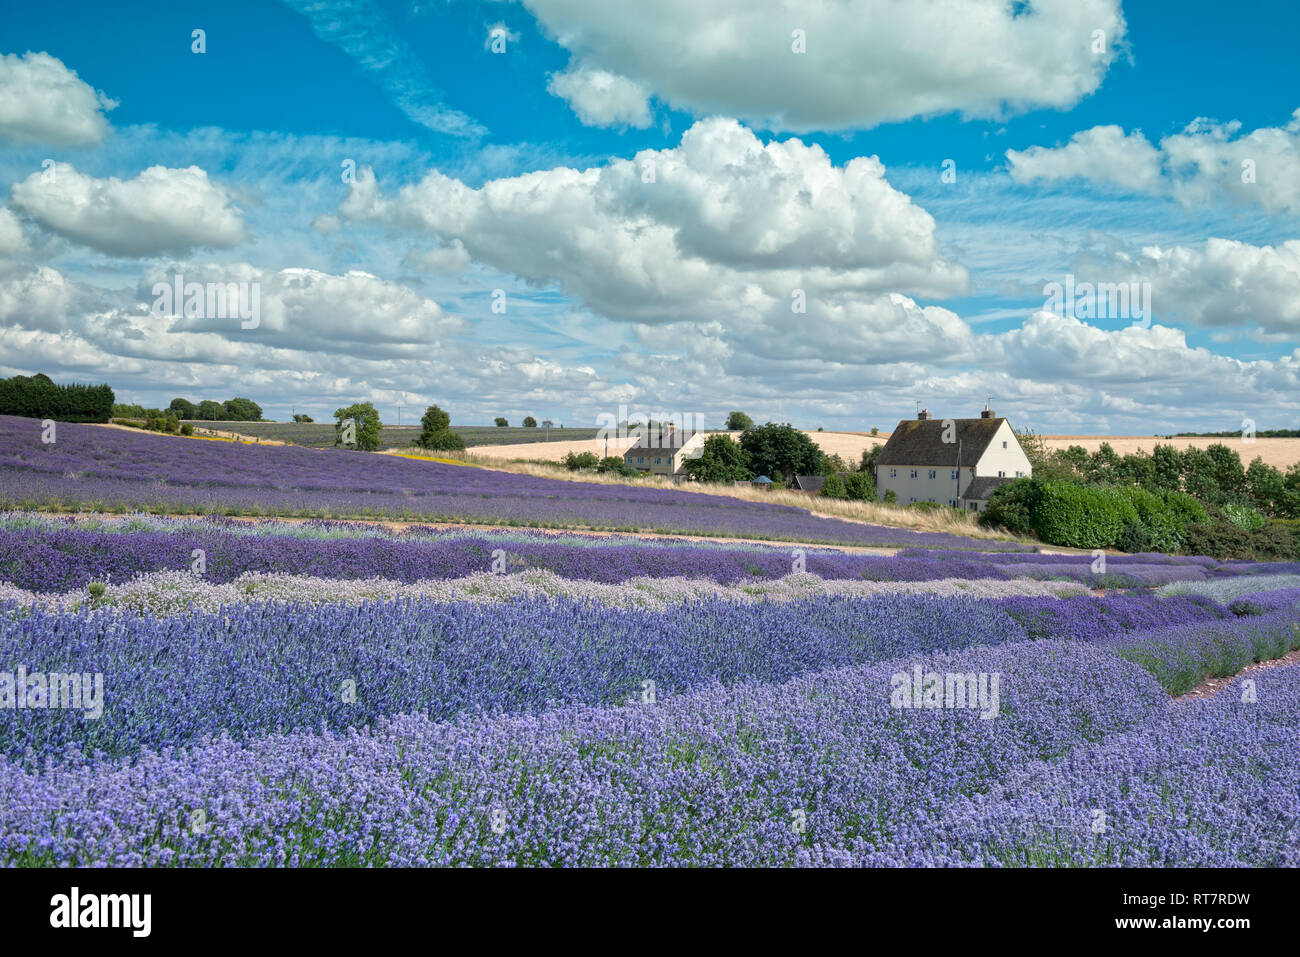 Lavender field in Cotswolds Stock Photo